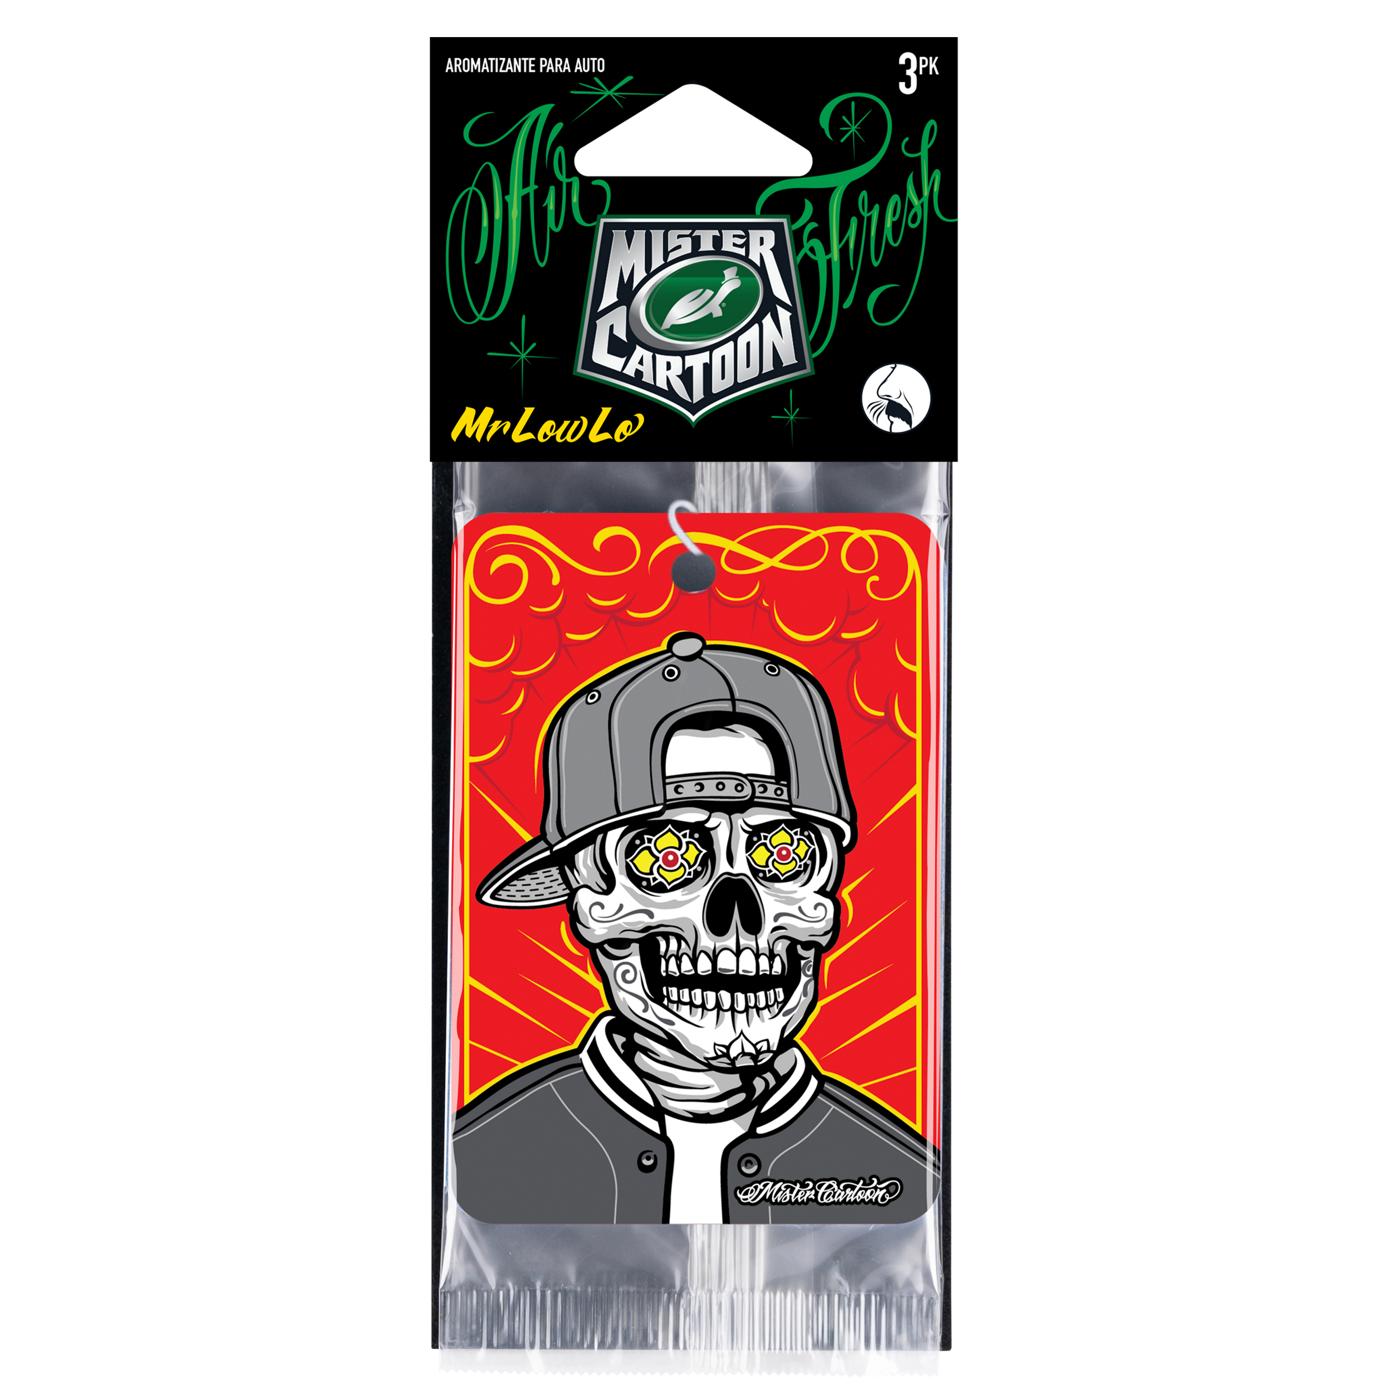 Turtle Wax Mister Cartoon Paper Air Fresheners - Mr. Low Lo; image 1 of 2